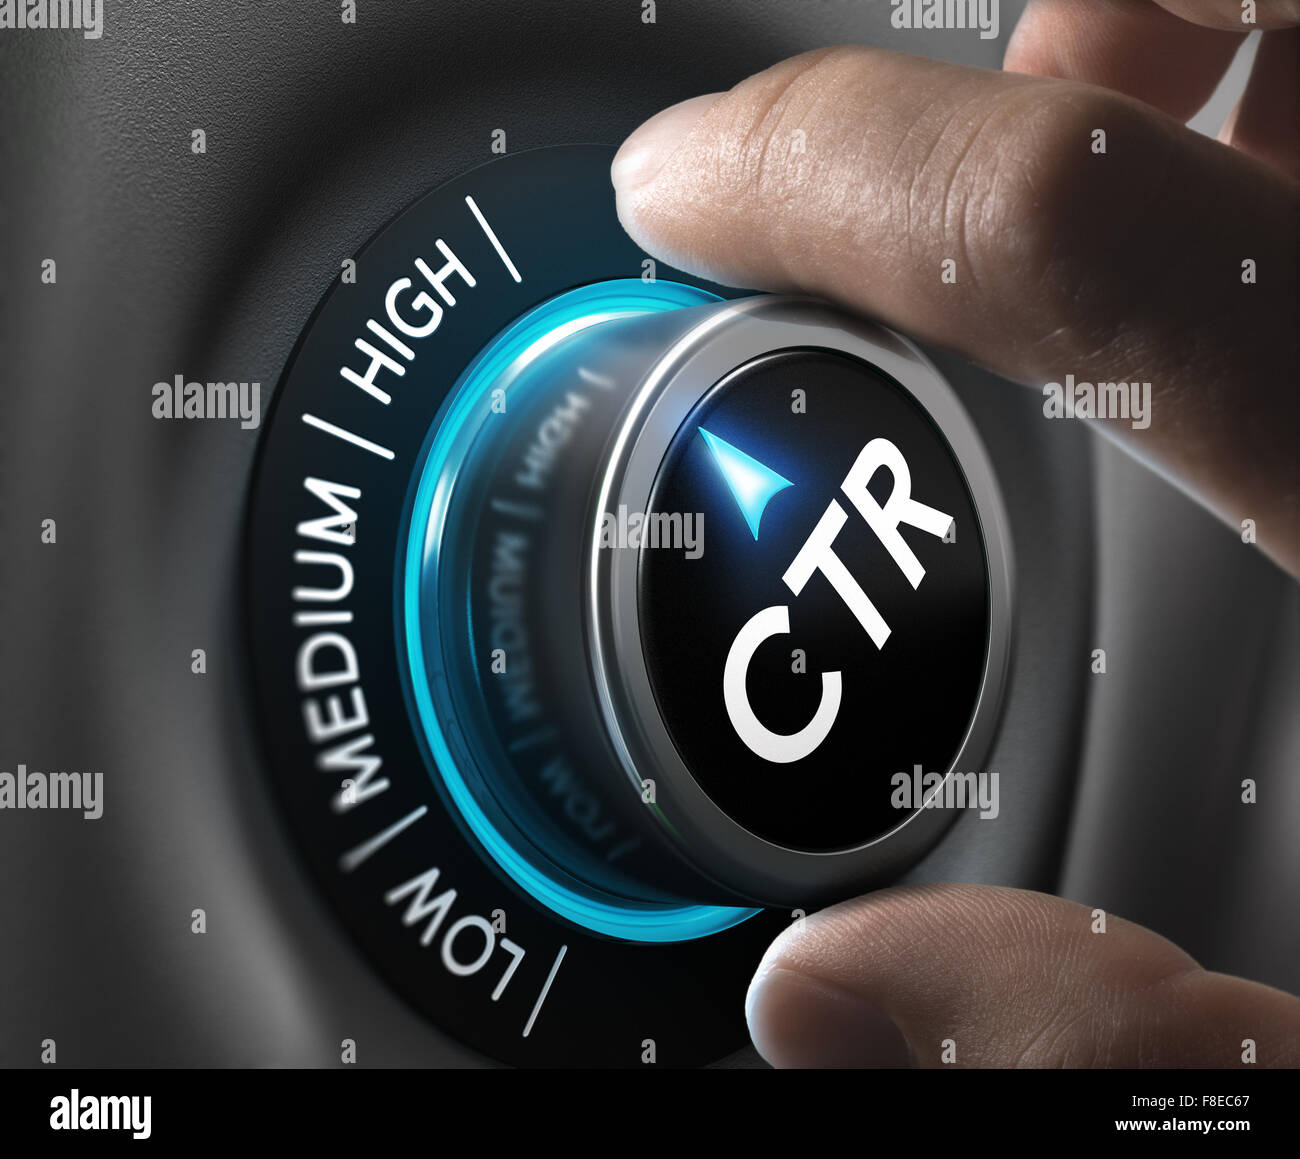 hand turning a ctr knob on the highest position. Concept image to illustrate a high click through rate during an advertising cam Stock Photo